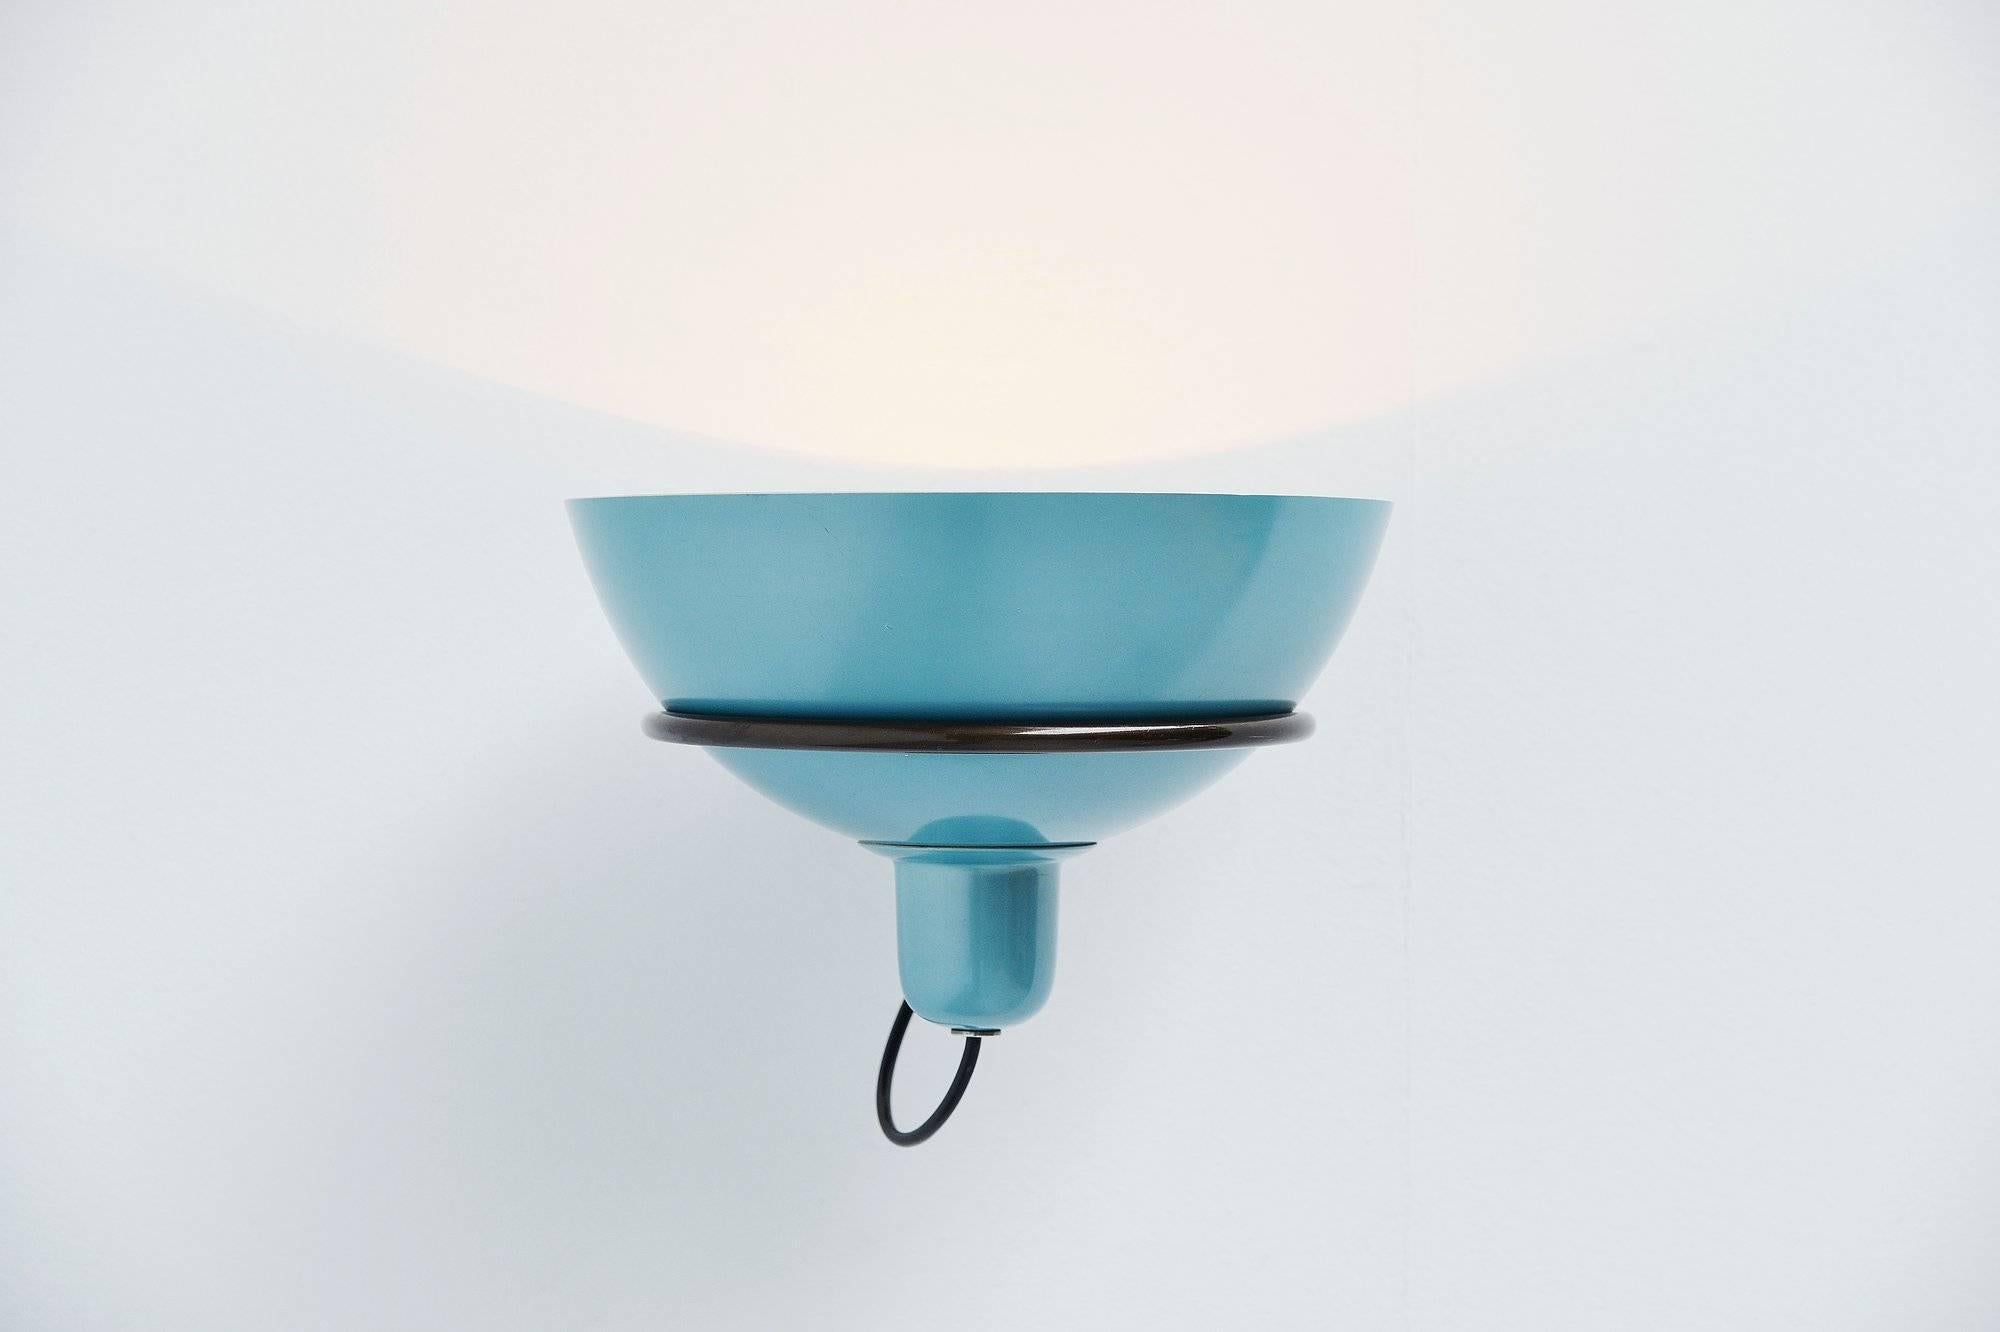 Single wall lamp model 2/1 designed by Gino Sarfatti, manufactured by Arteluce, Italy, 1960. This nice wall light has an adjustable reflector lacquered in blue on the outside, bar ring and wall flange in patinated aluminum. The lamp is unmarked but